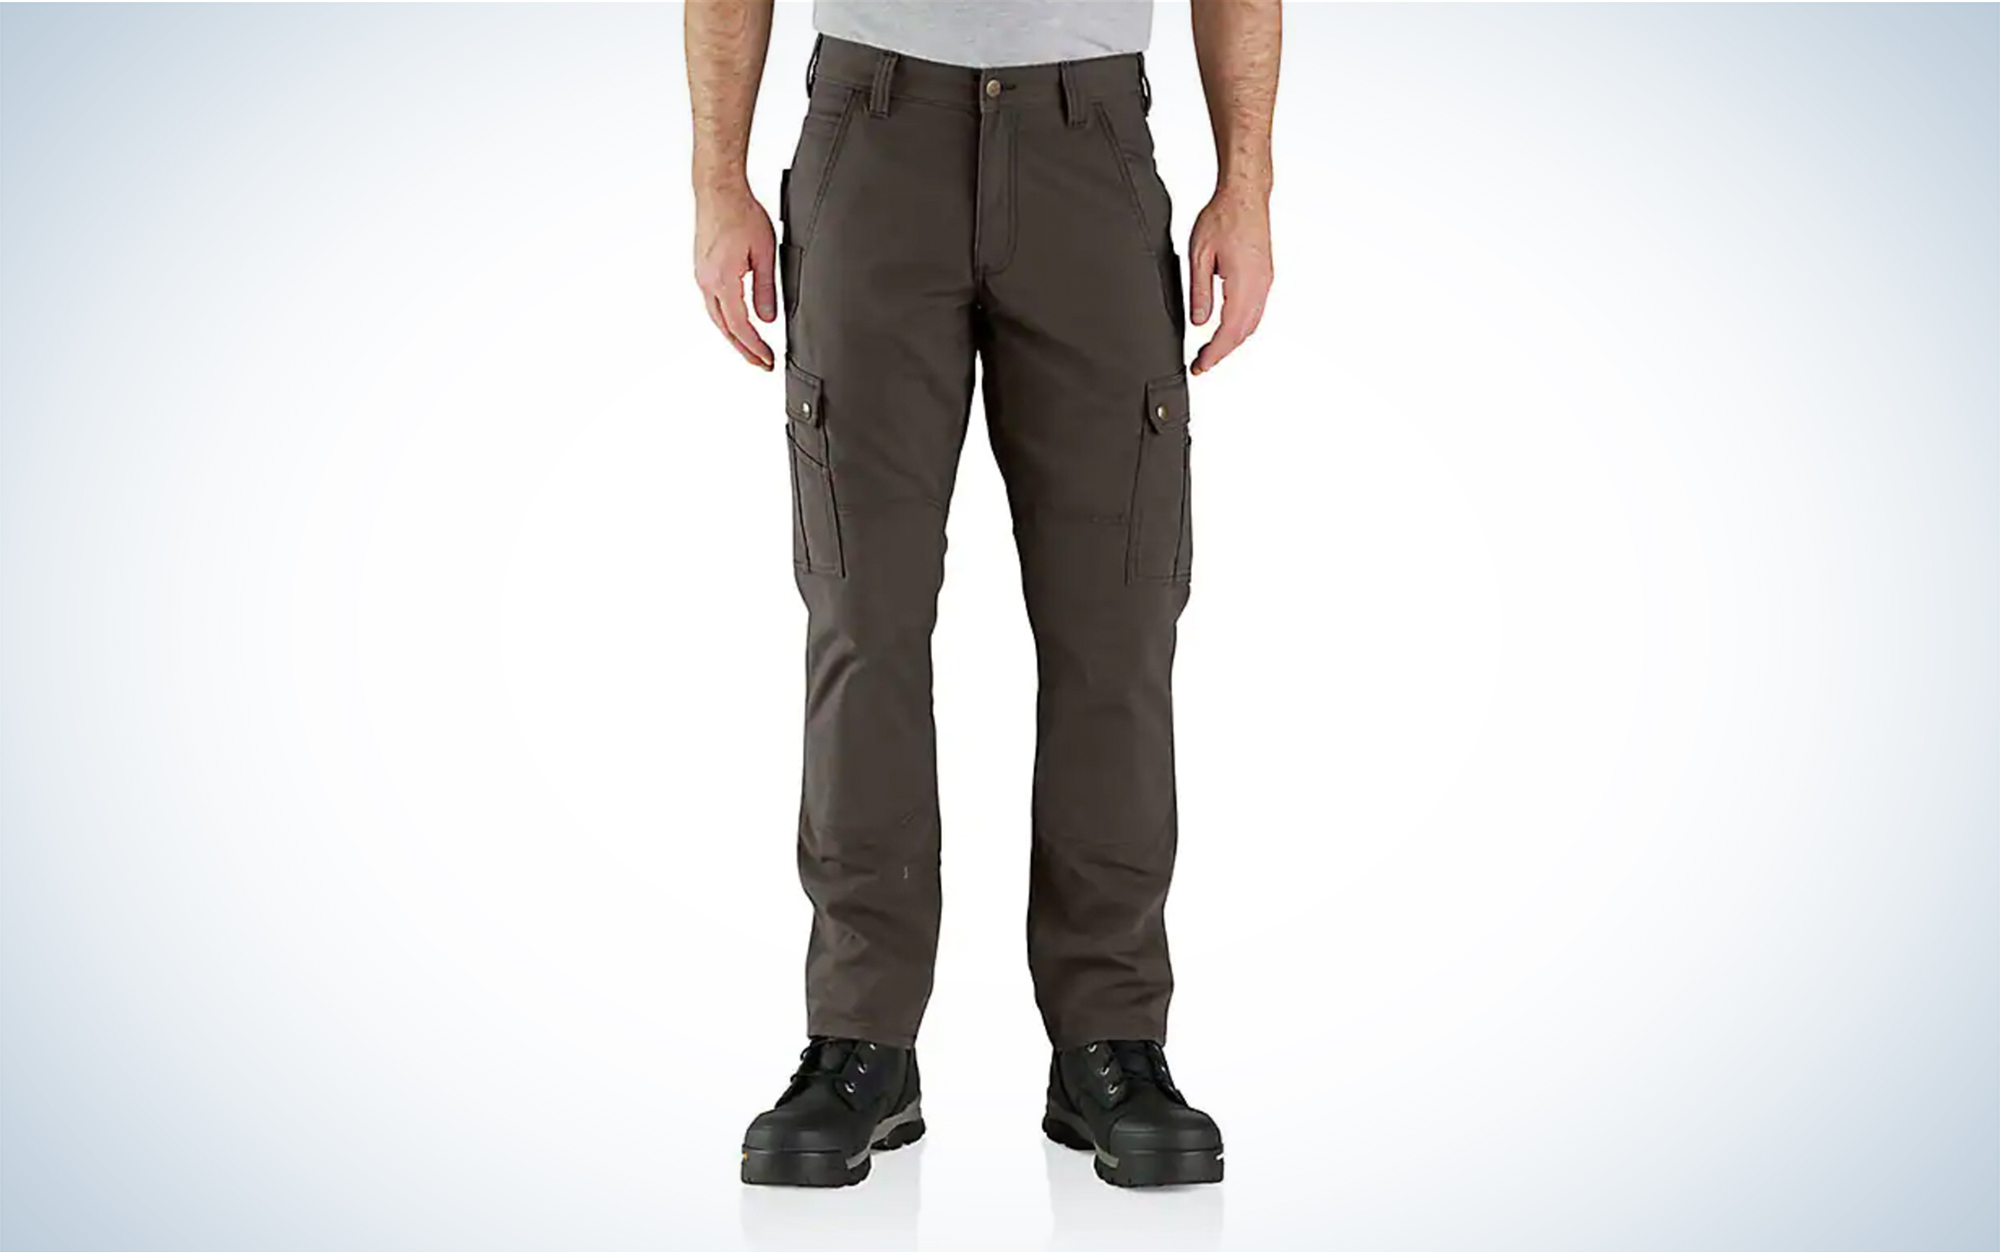 We tested the Carhartt Rugged Flex Ripstop Work Pant.